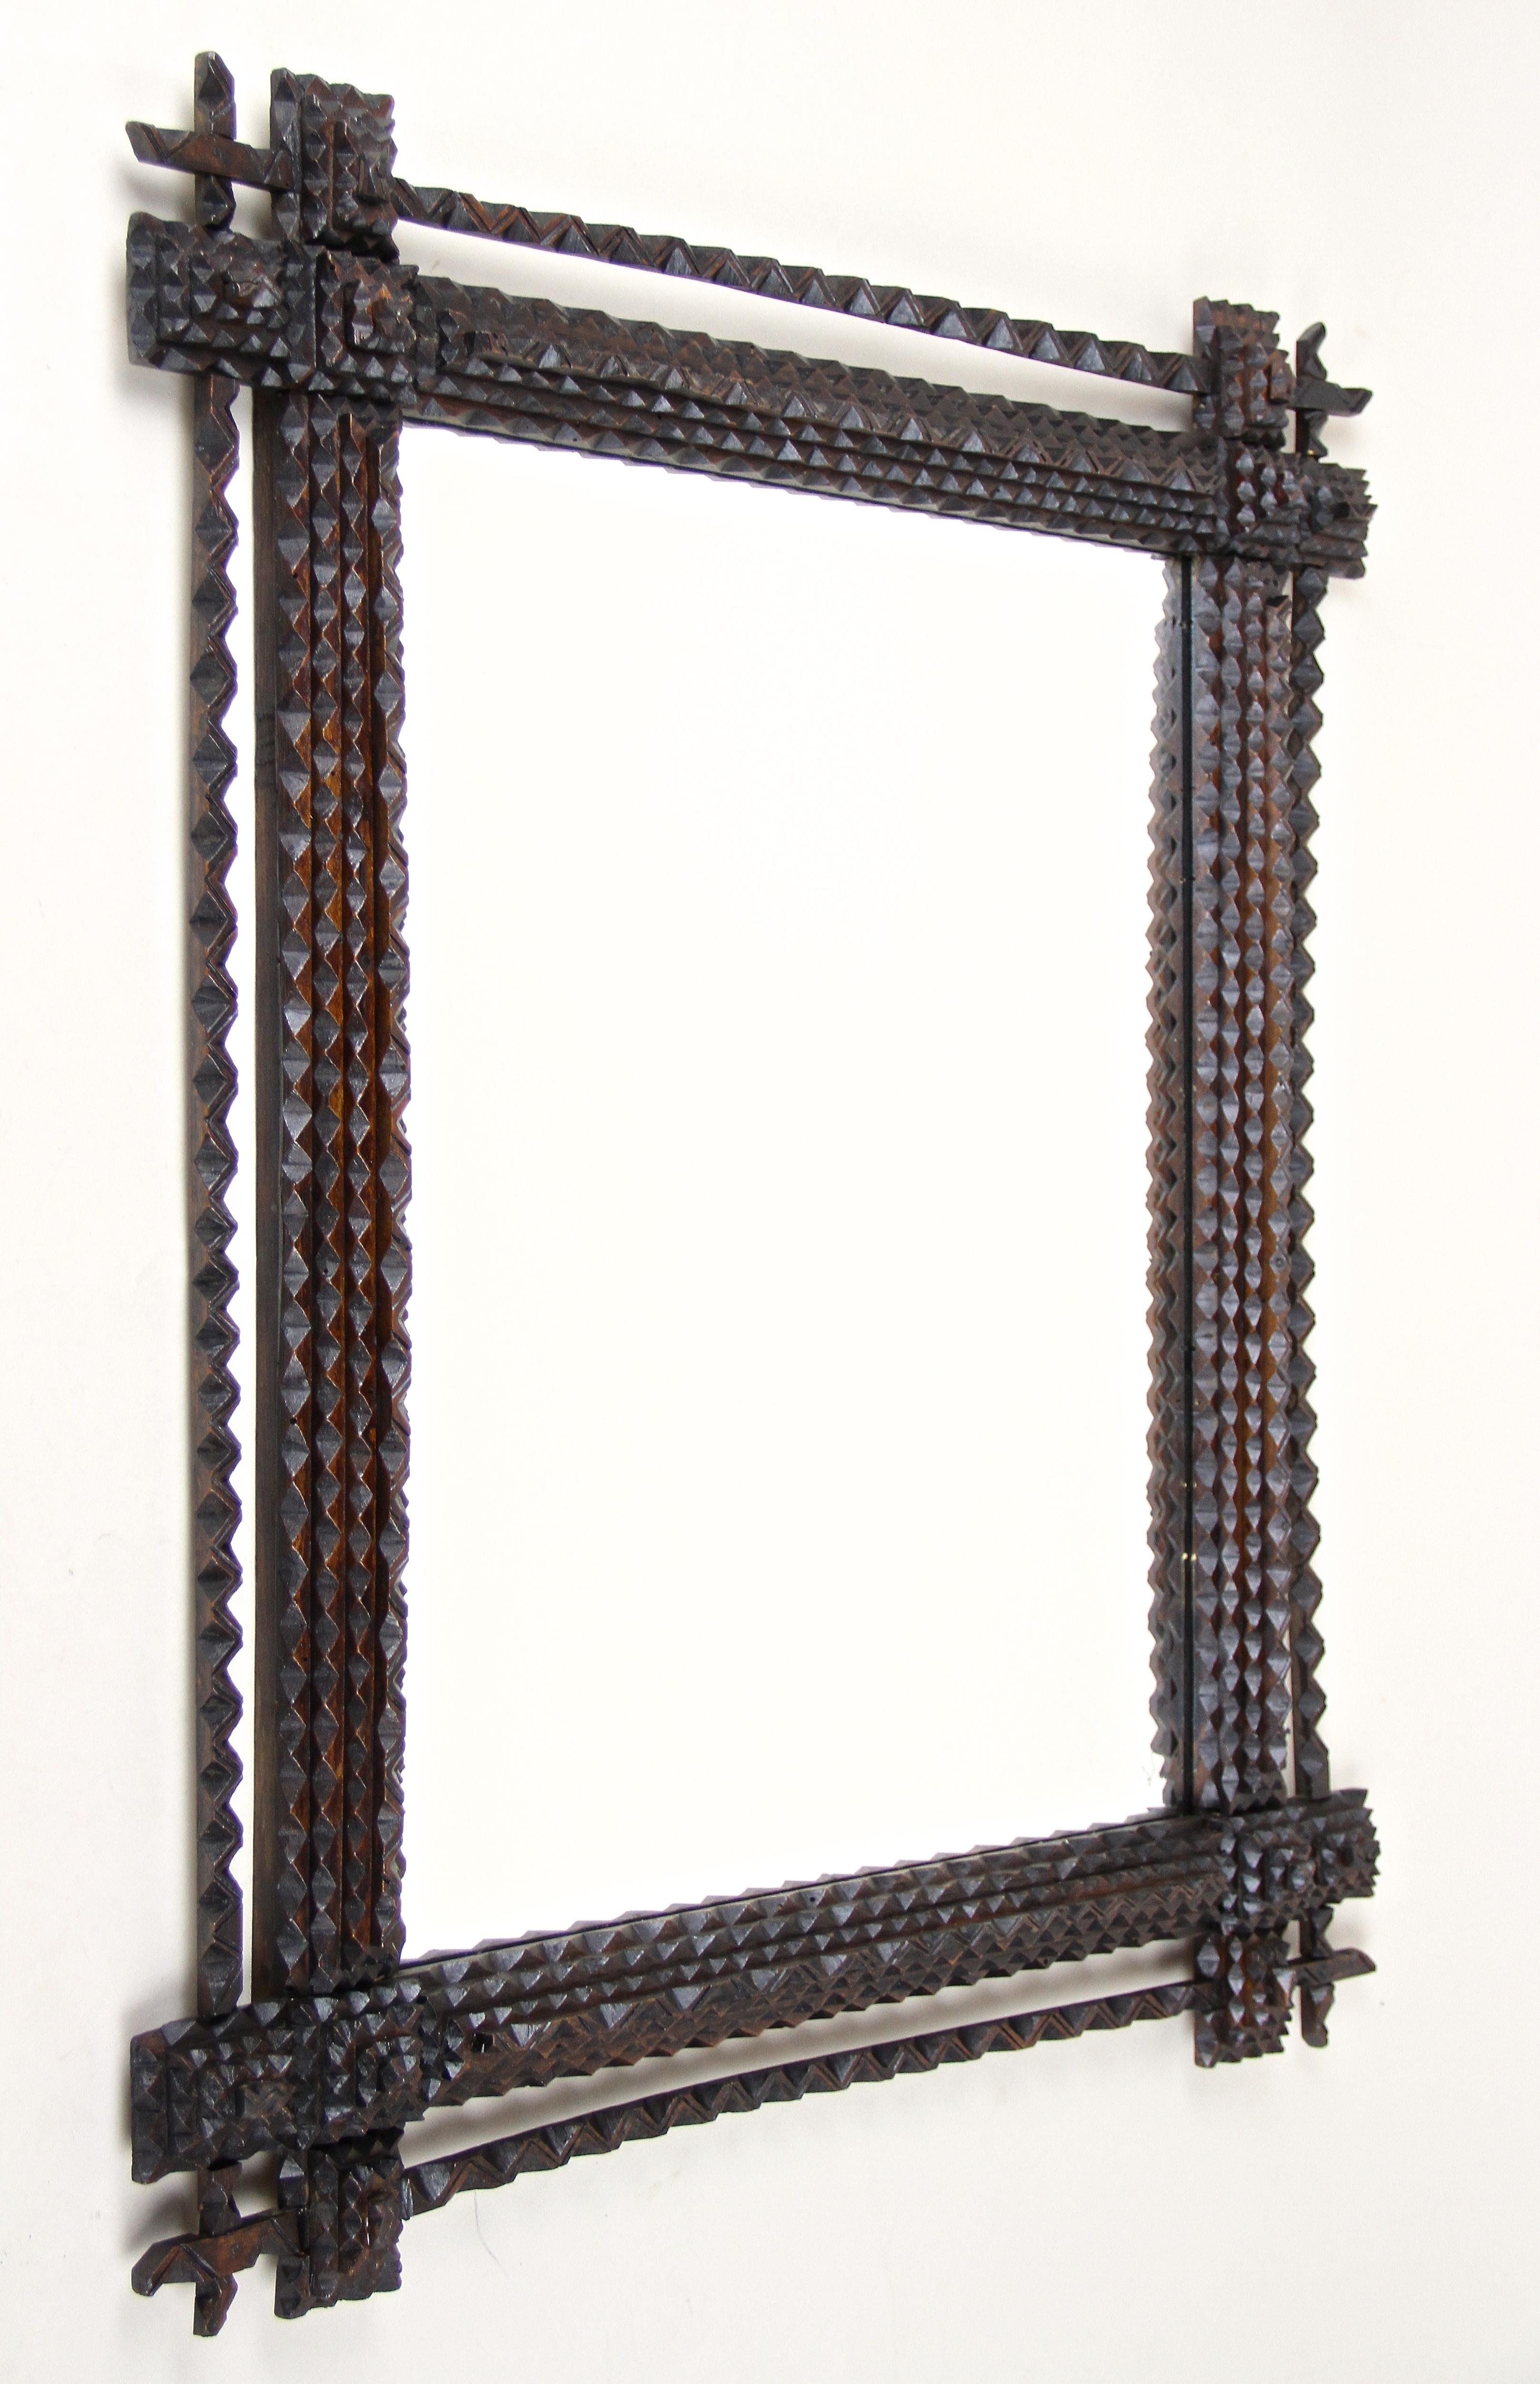 Out of the ordinary Tramp Art Mirror from the late 19th century in Austria. Elaborately hand carved out of basswood around 1870 this rustic mirror comes with a dark brown stained surface in great original condition. The highlight of this rural wall